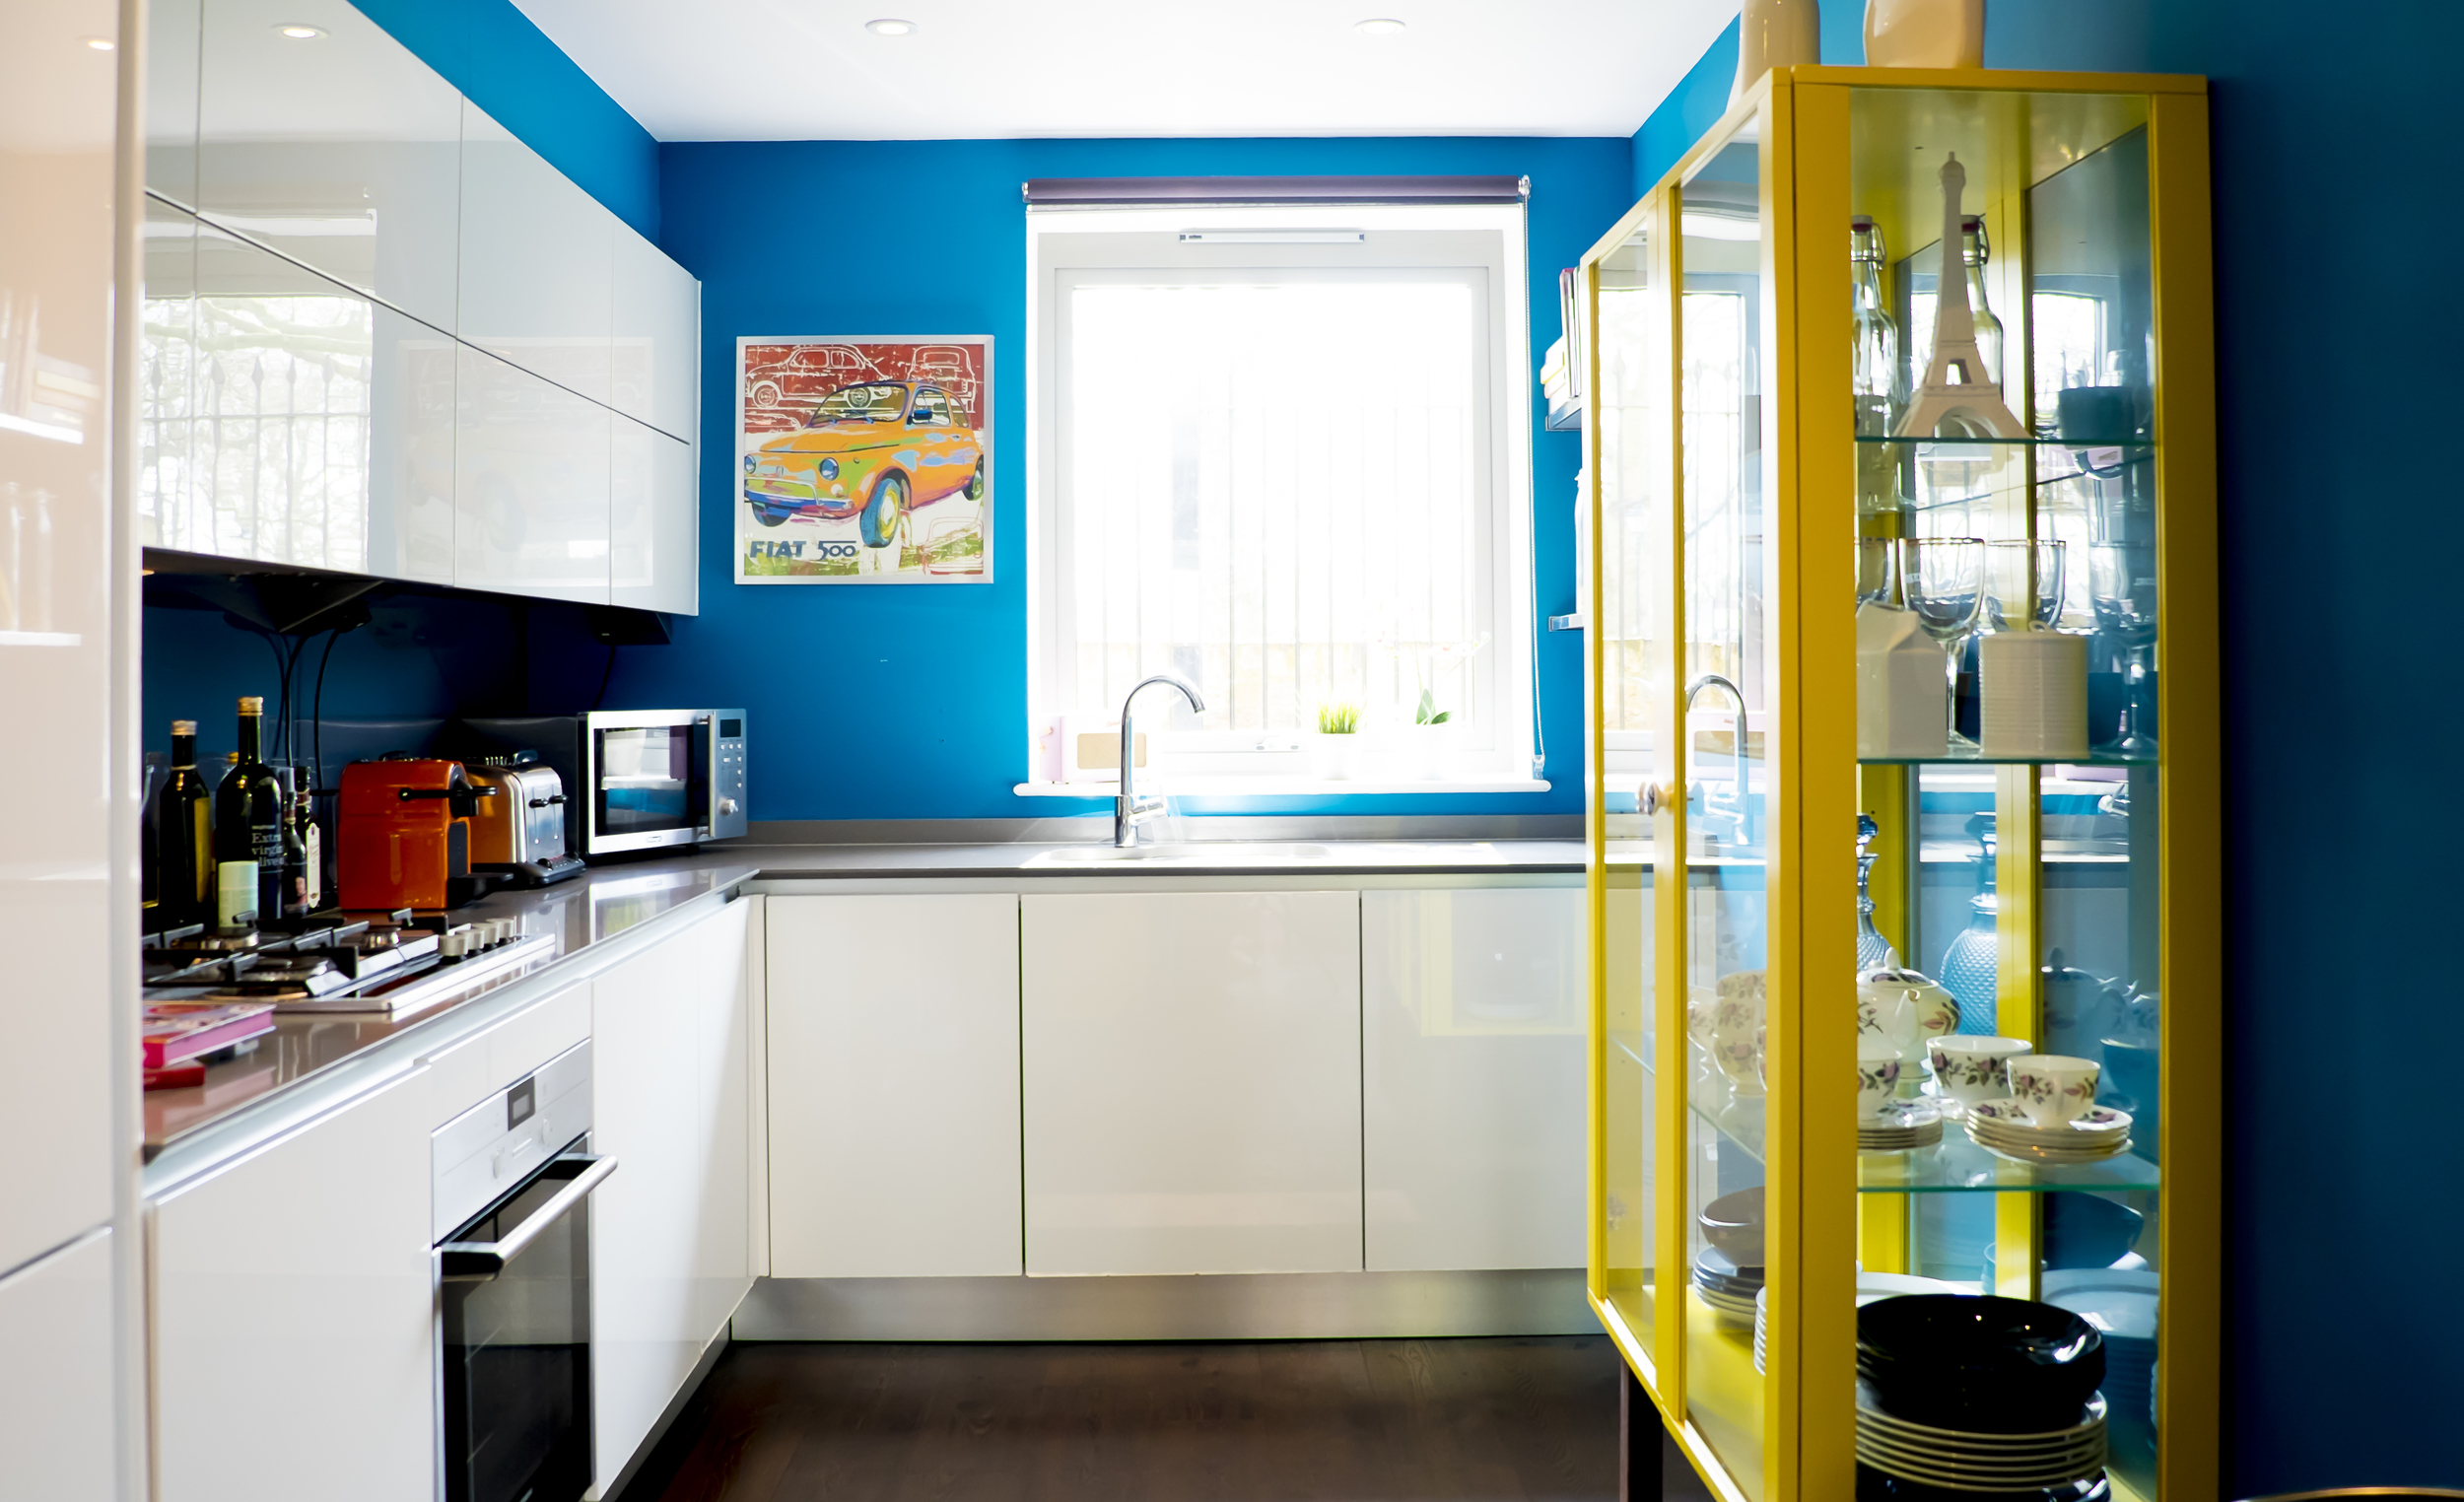 1. Repaint a room in a bold colour